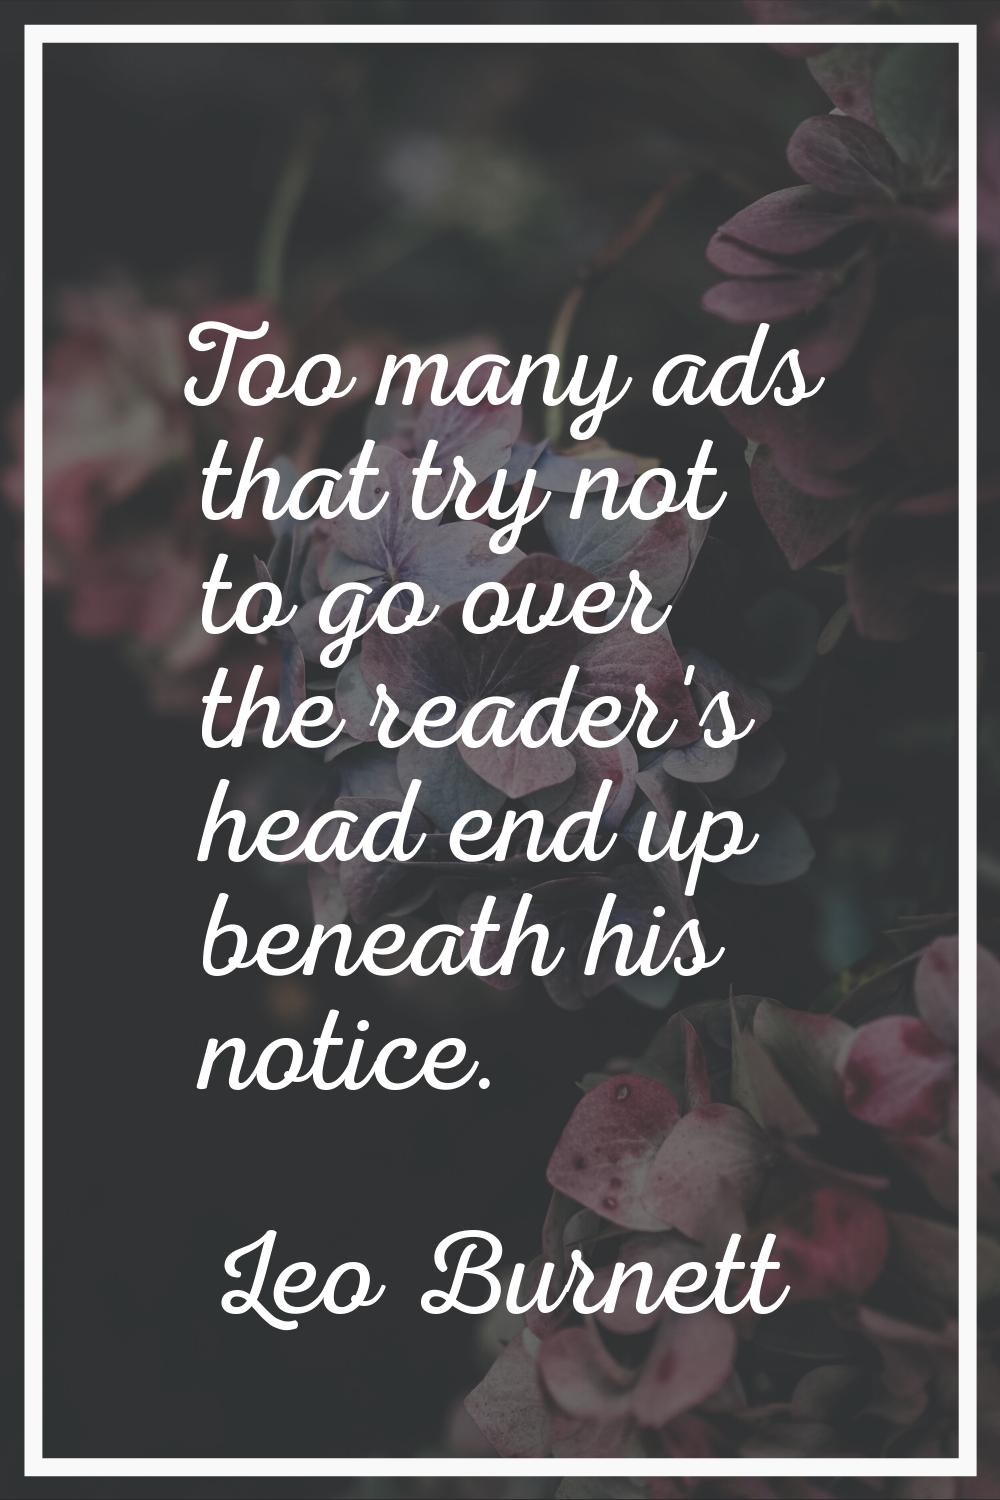 Too many ads that try not to go over the reader's head end up beneath his notice.